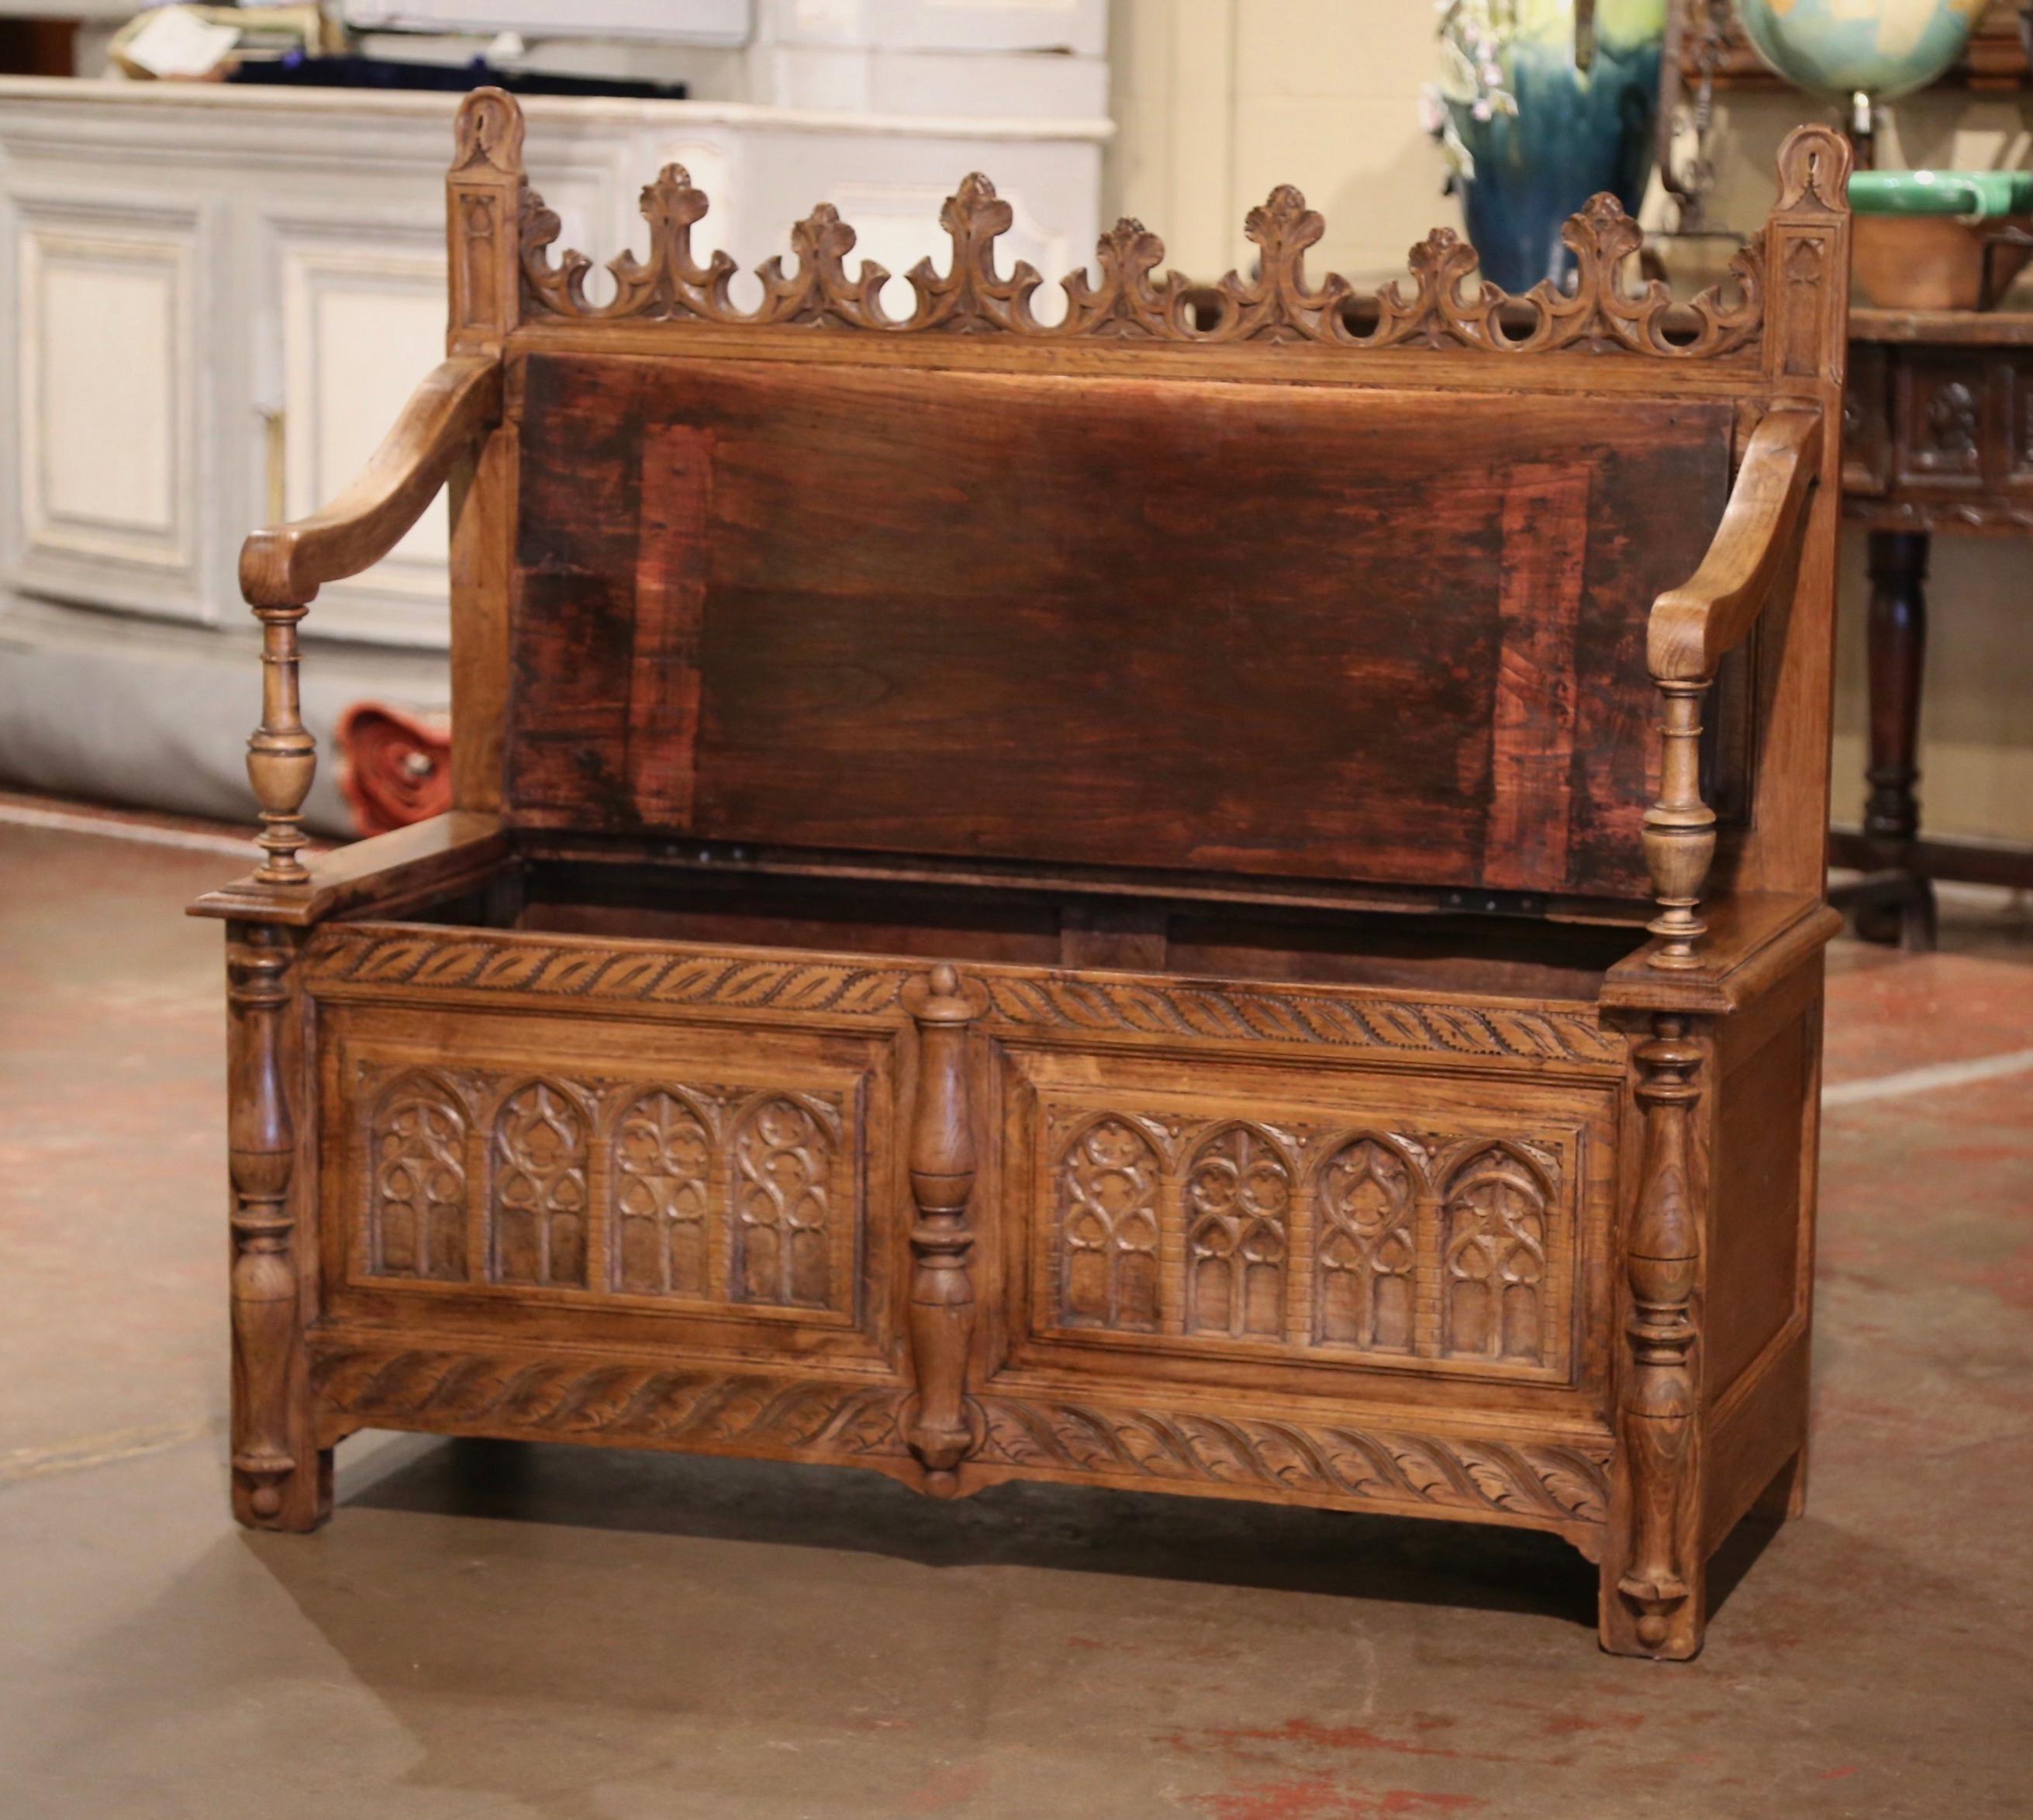 19th Century French Gothic Revival Carved Bleached Oak Hall Bench with Trapdoor For Sale 3